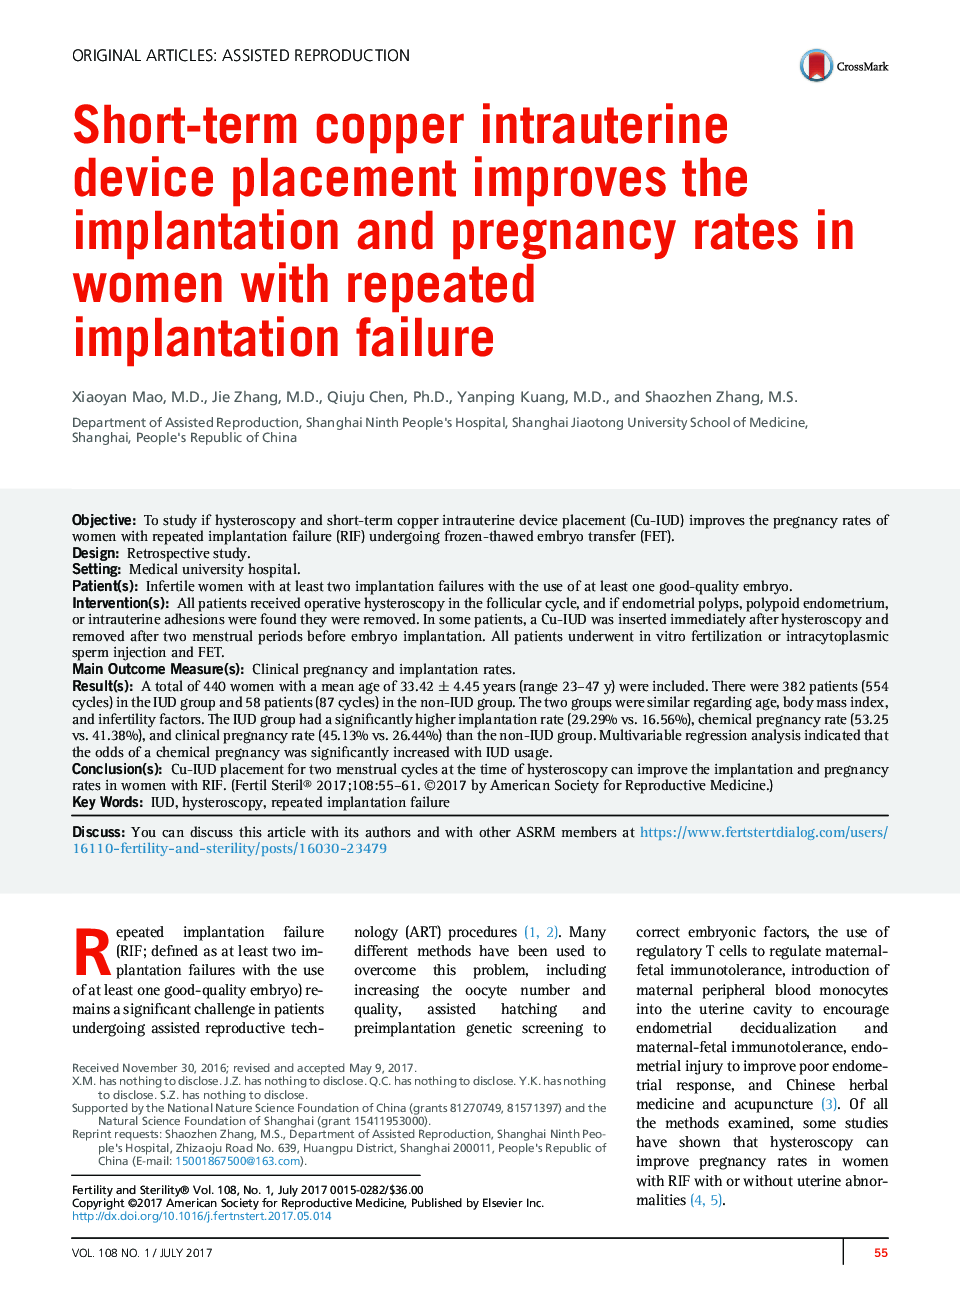 Short-term copper intrauterine device placement improves the implantation and pregnancy rates in women with repeated implantation failure